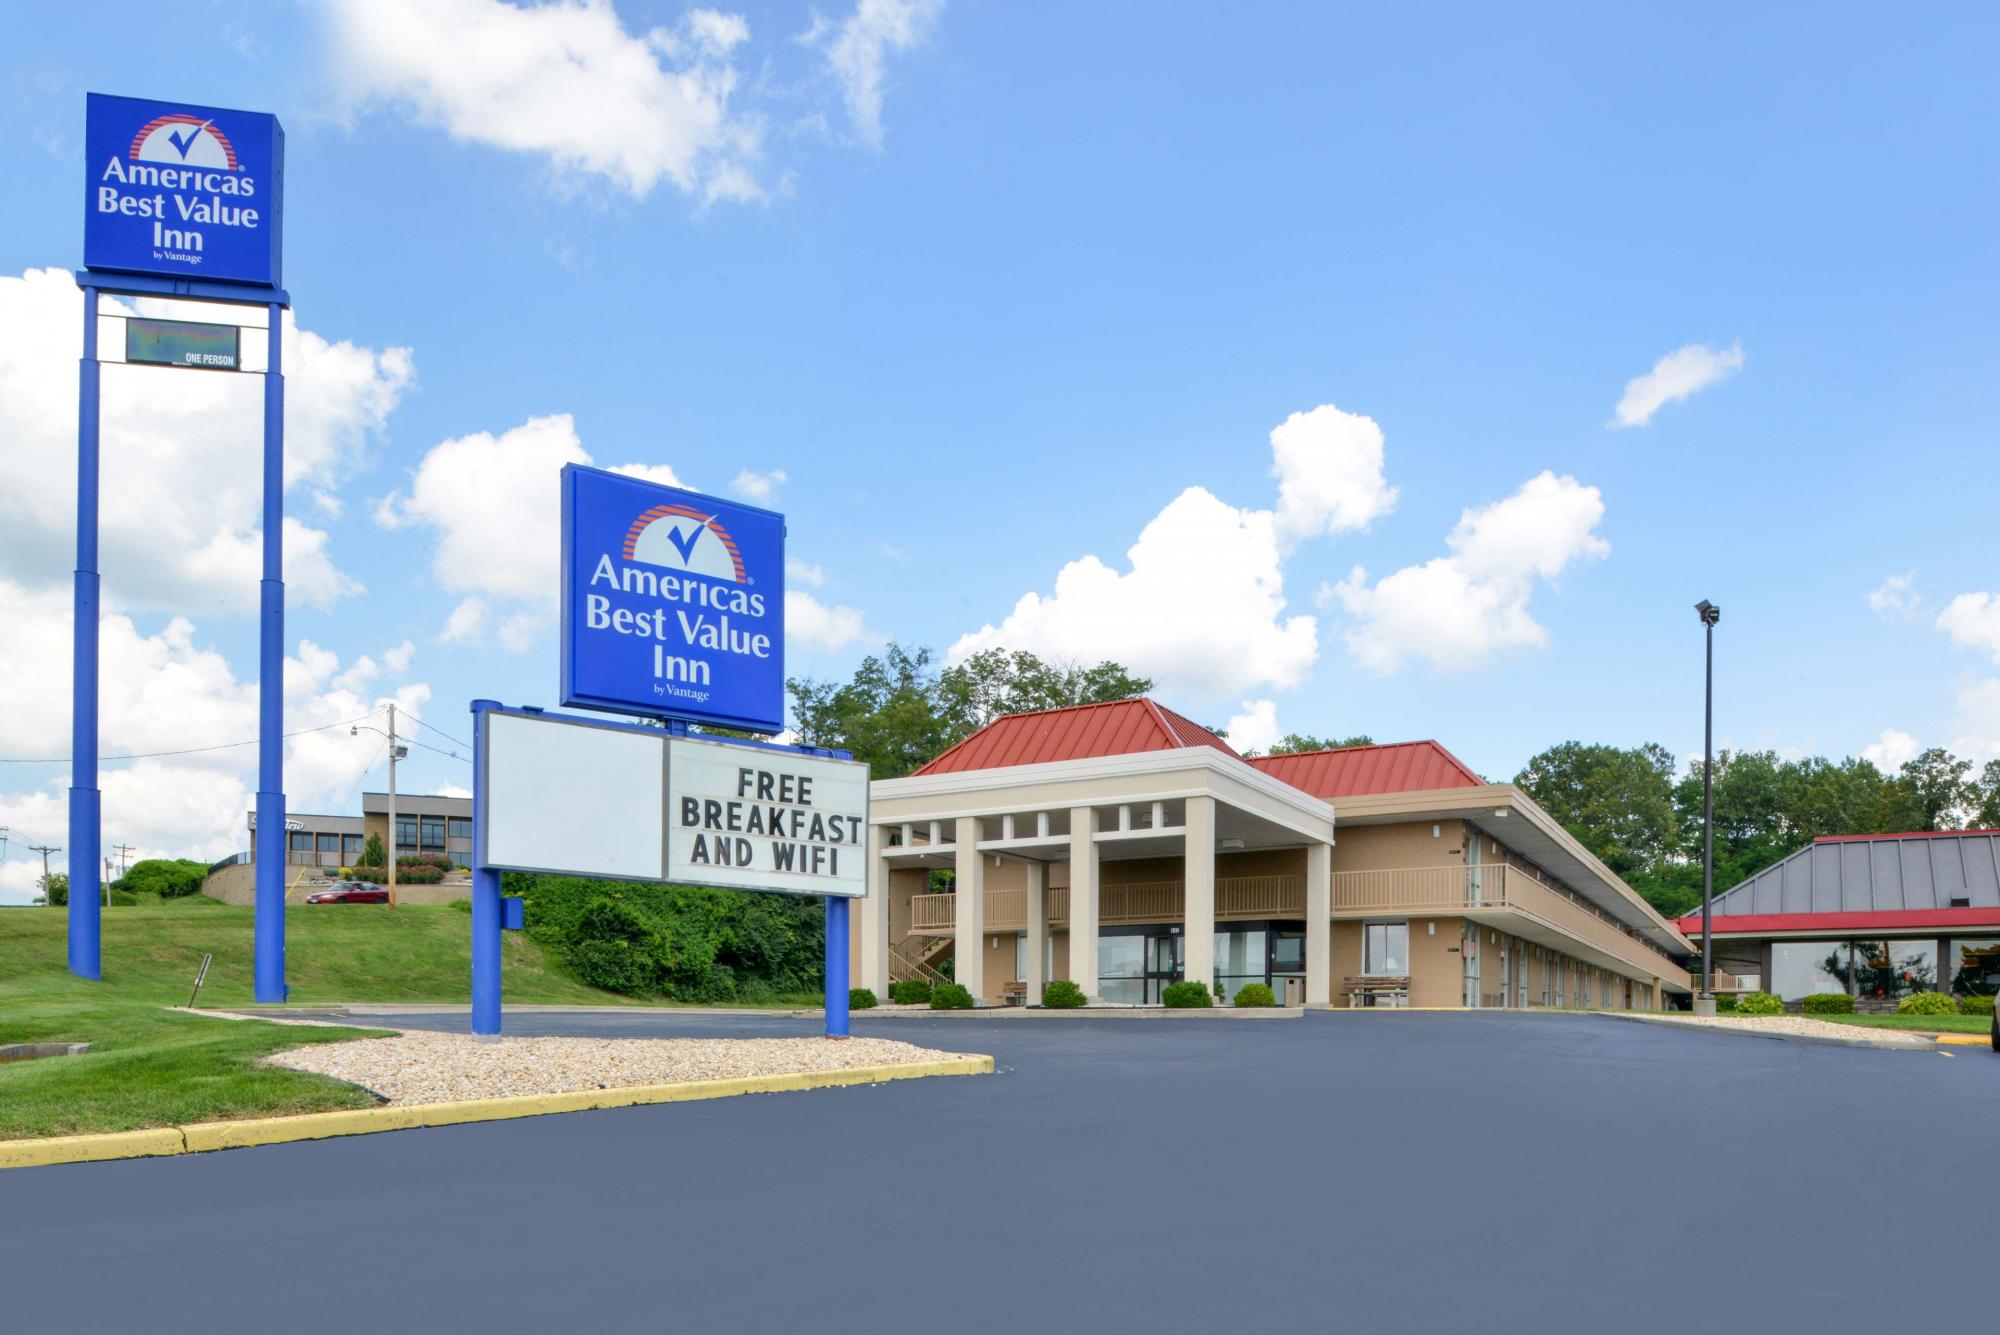 Street view of hotel exterior with sign